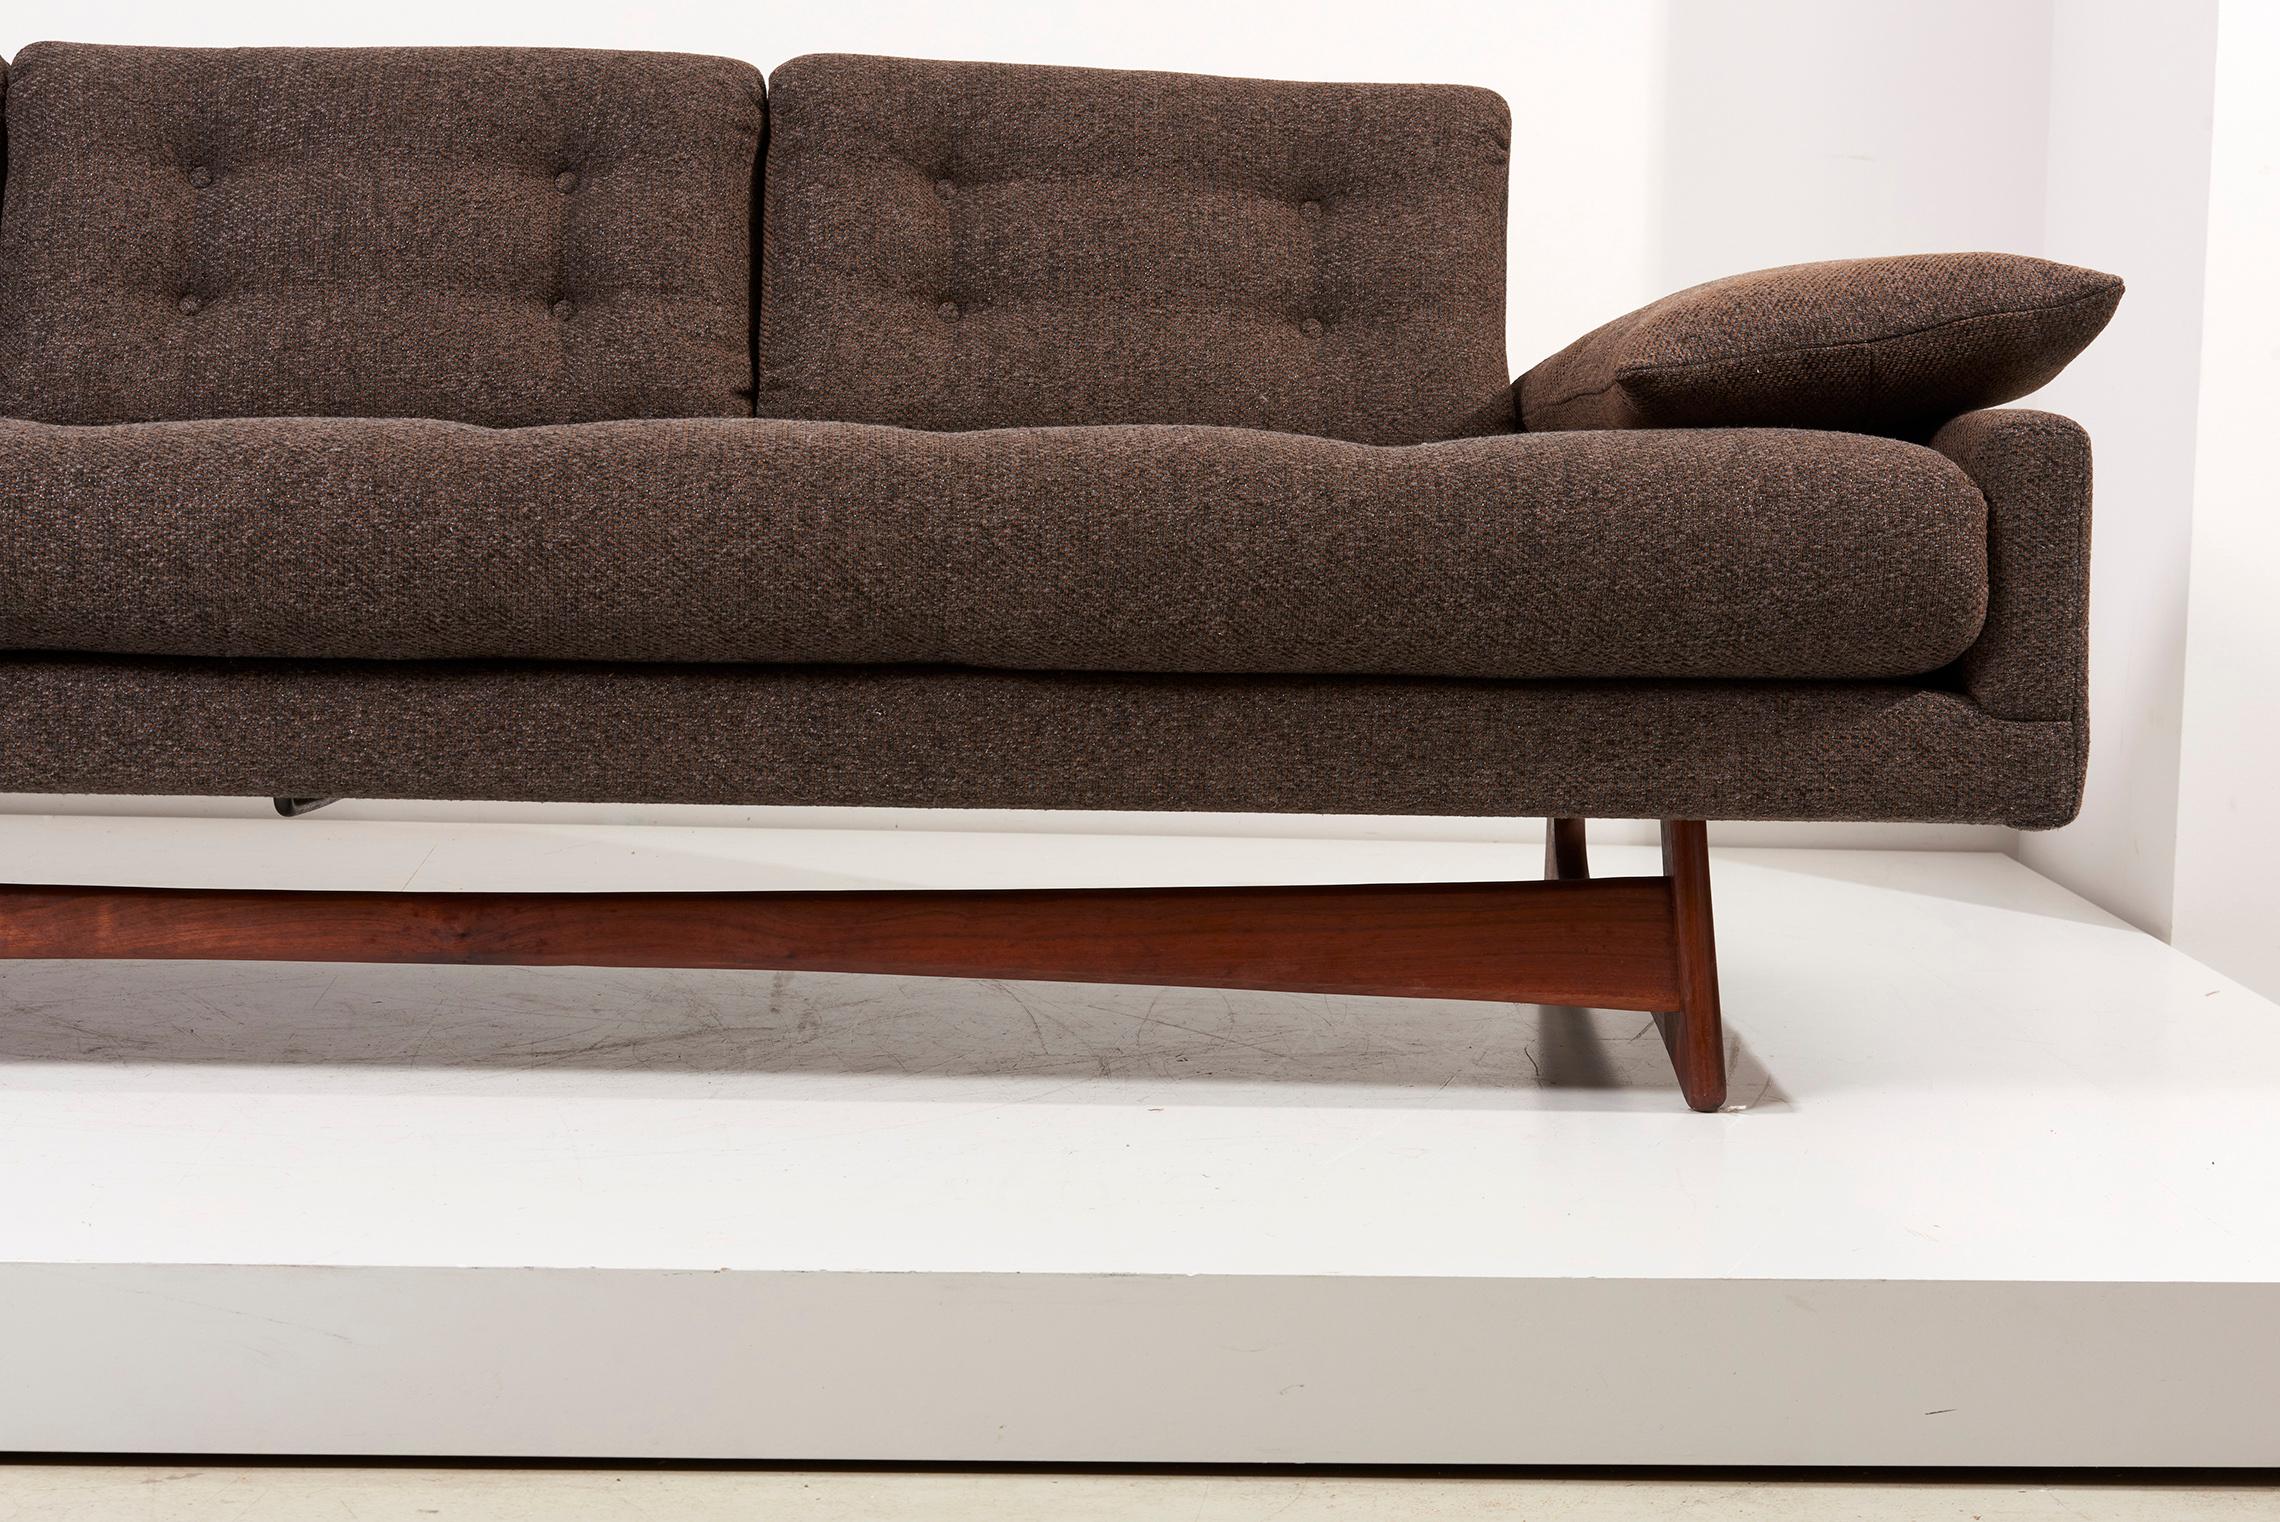 Adrian Pearsall 'Gondola Sofa' in Brown Fabric for Craft Associates, USA, 1950s For Sale 5